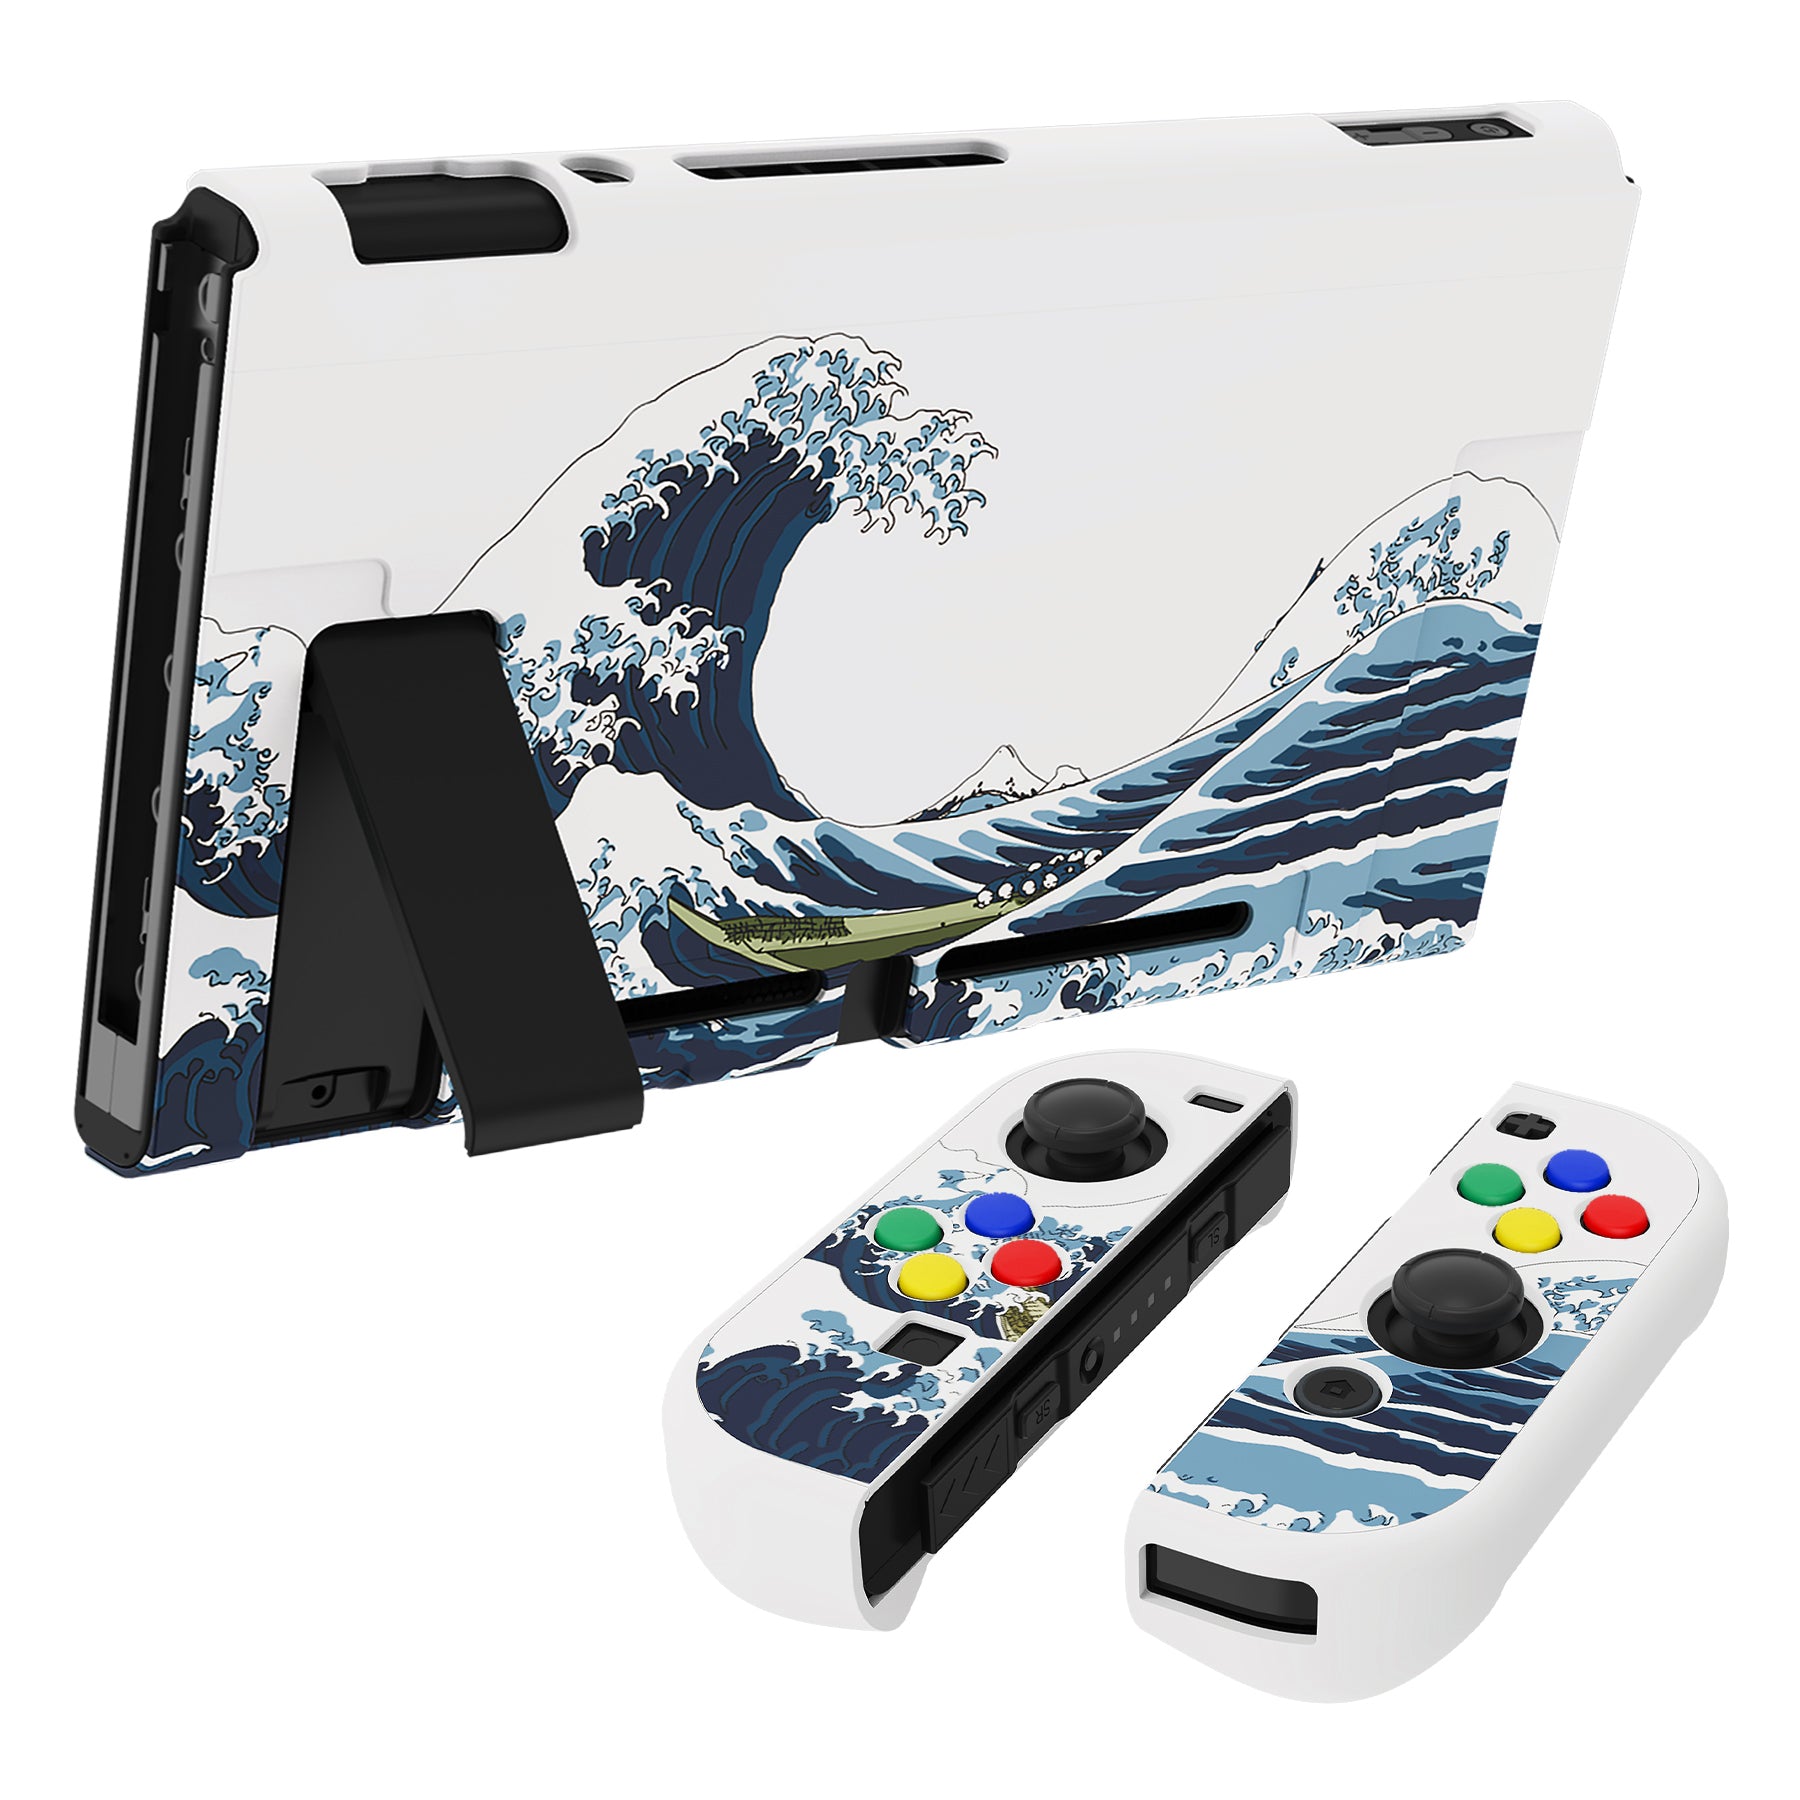 PlayVital Back Cover for Nintendo Switch, NS Joycon Handheld Controller Protector Hard Shell, Dockable Protective Case with Colorful ABXY Direction Button Caps - The Great Wave - NTT121 PlayVital